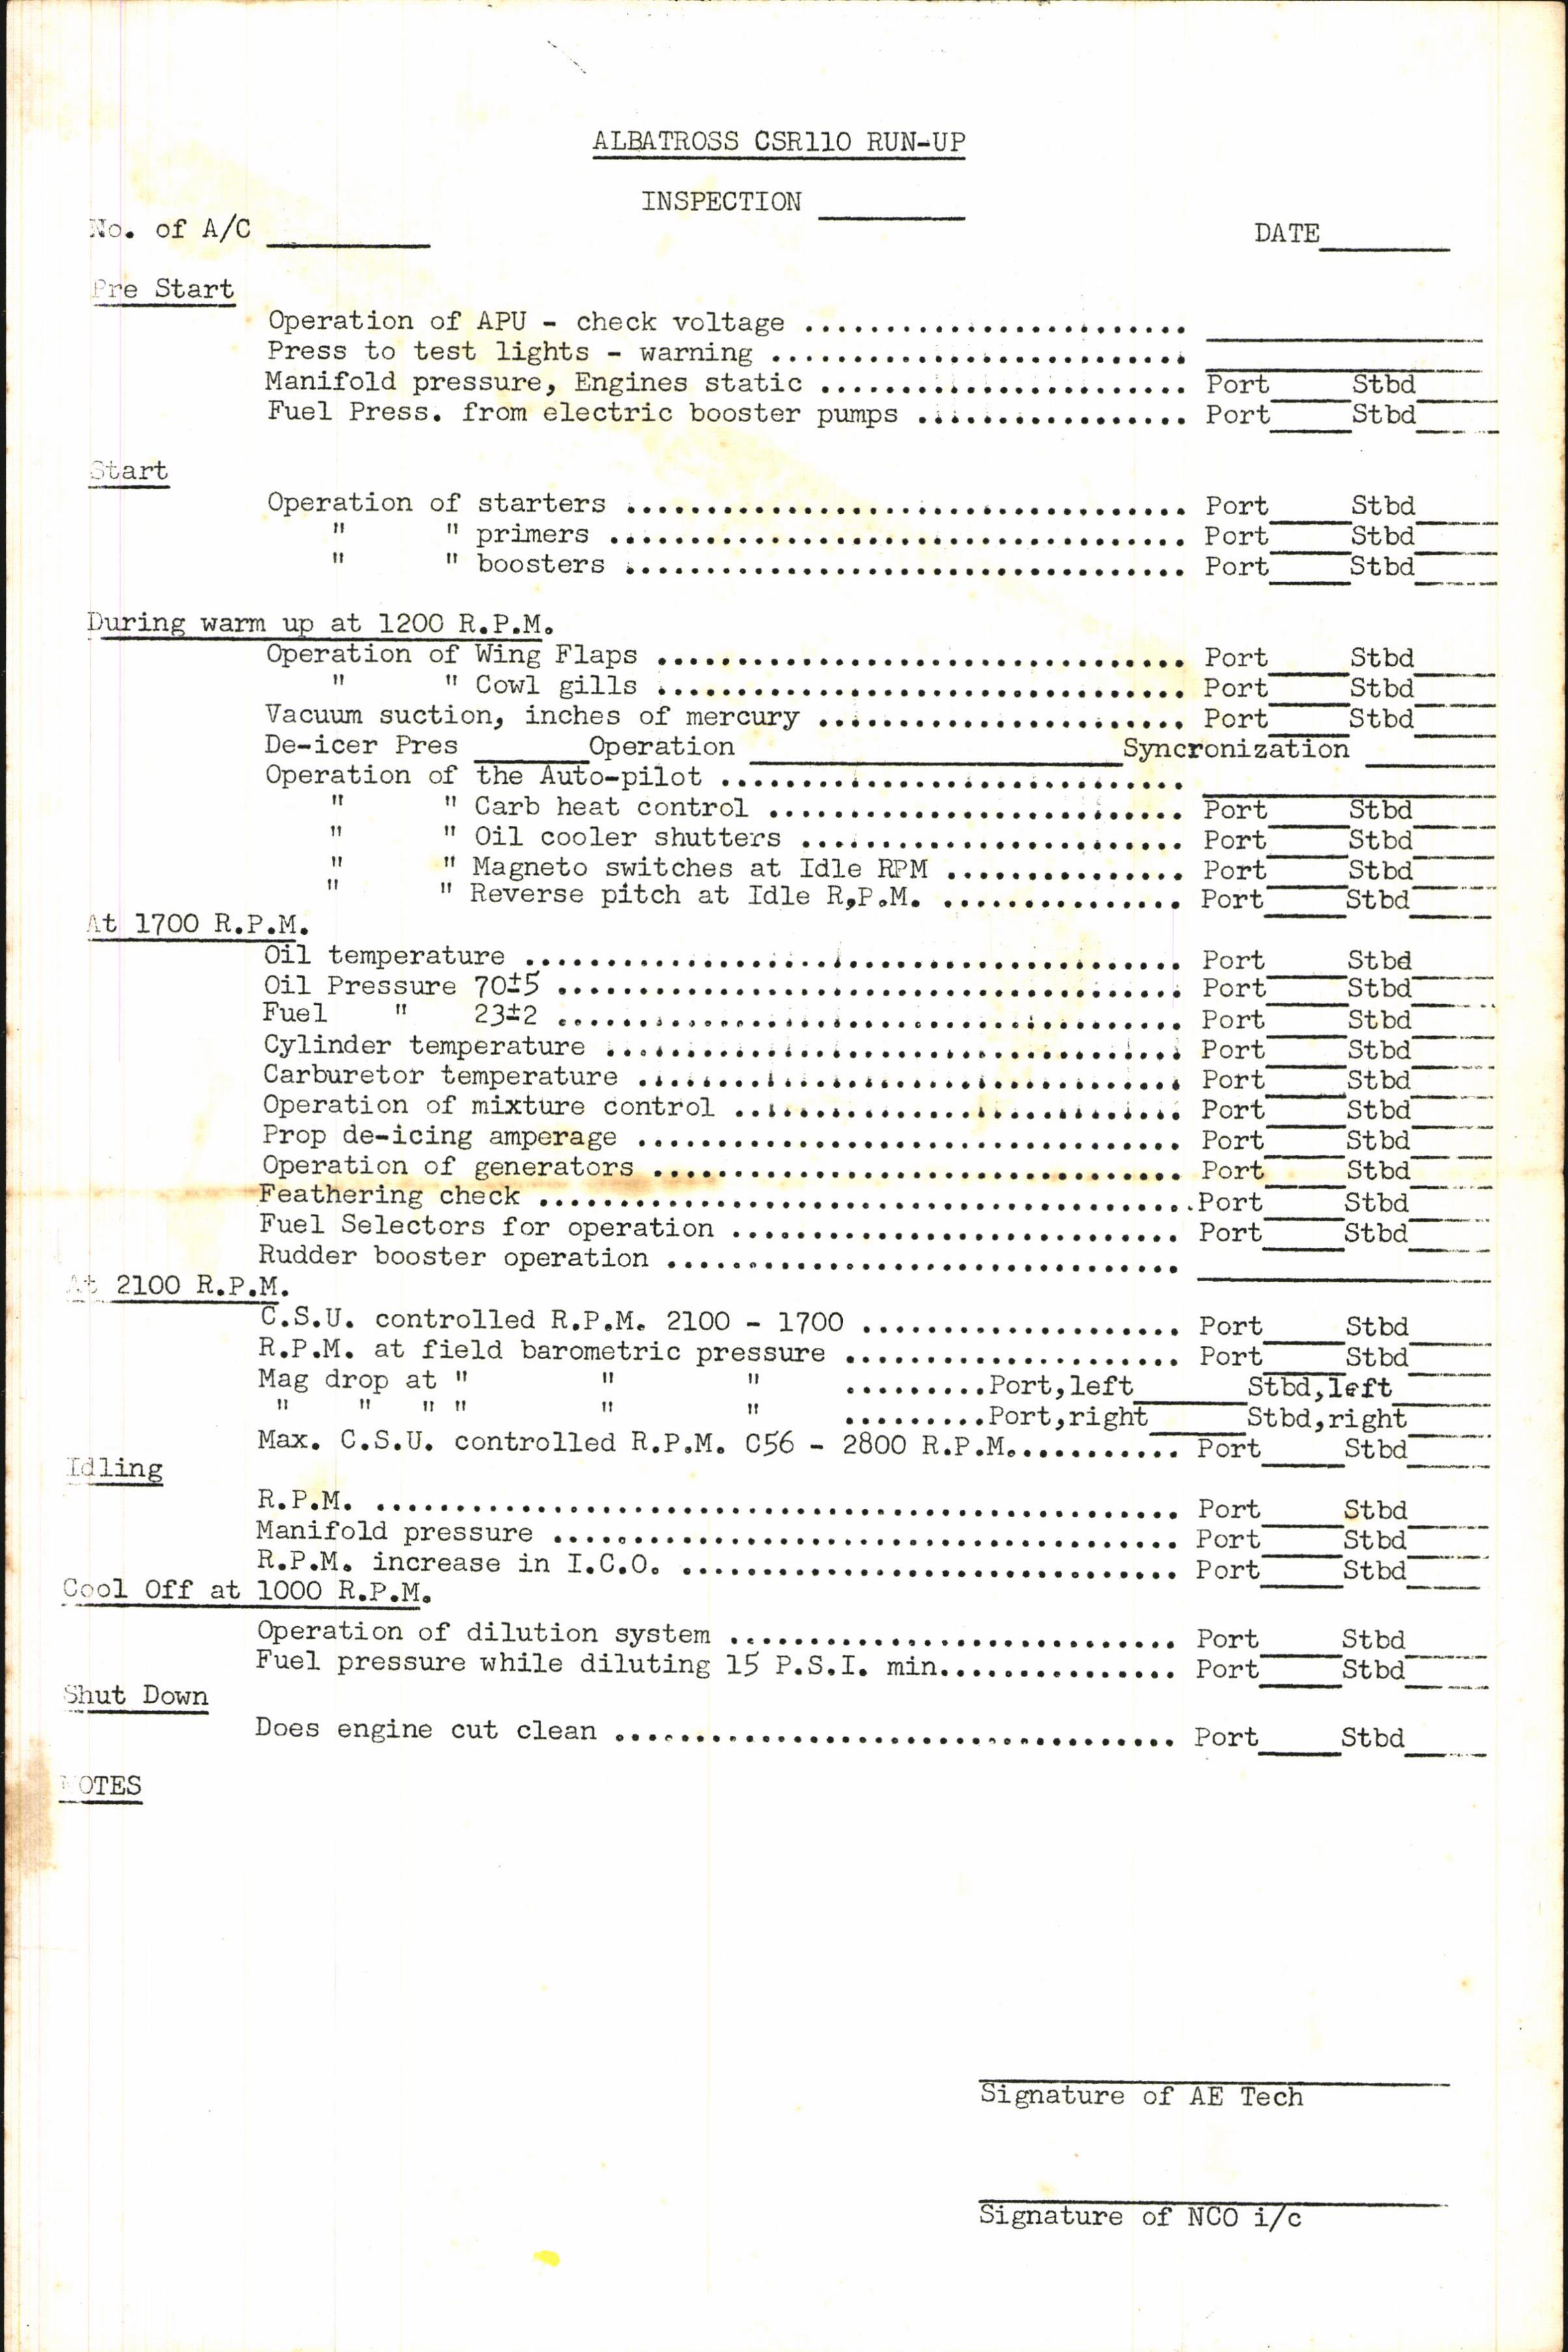 Sample page 1 from AirCorps Library document: Albatross CSR110 Run-Up